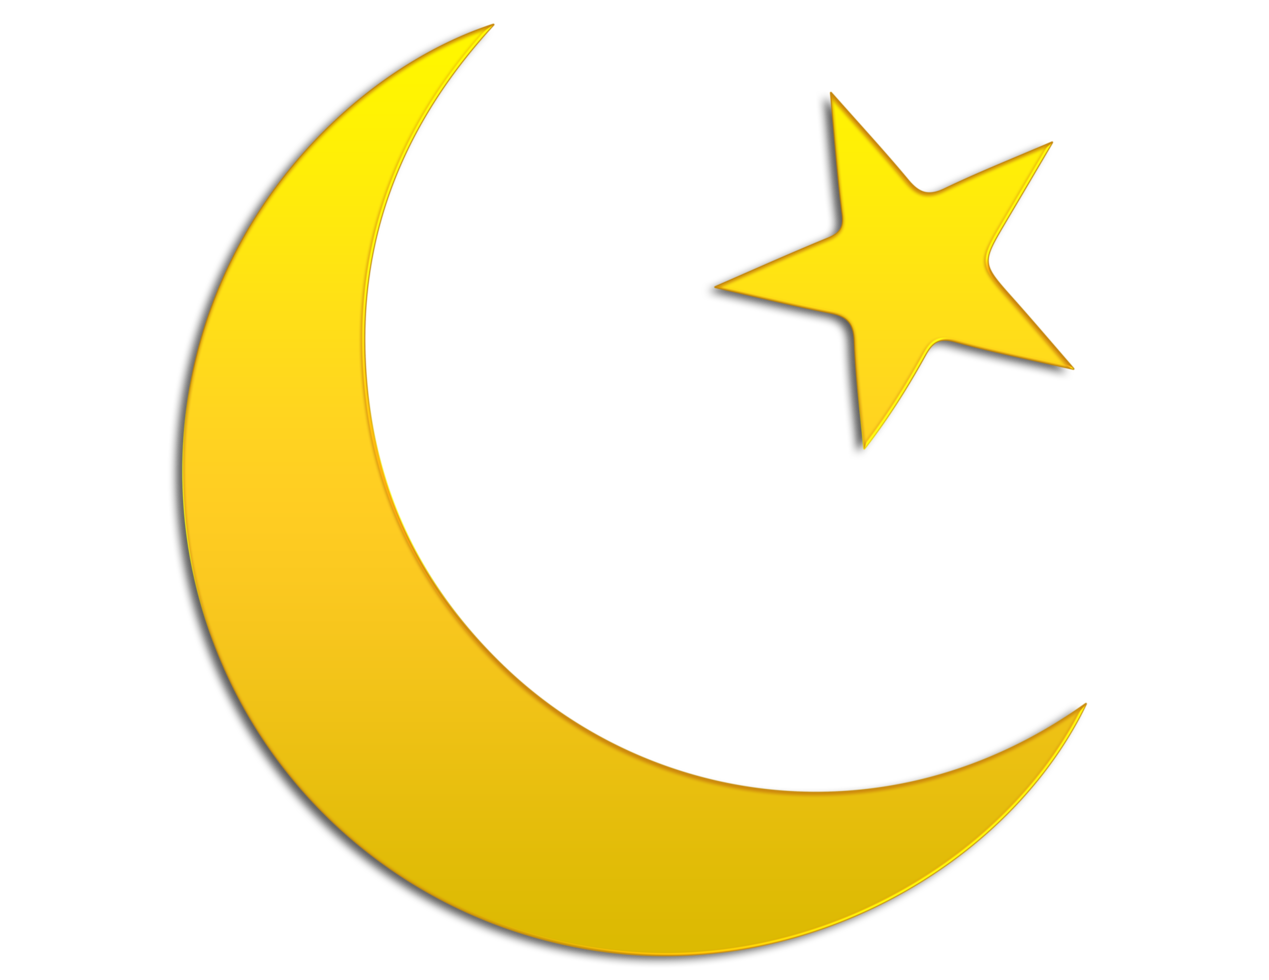 Moon icon on transparent background png